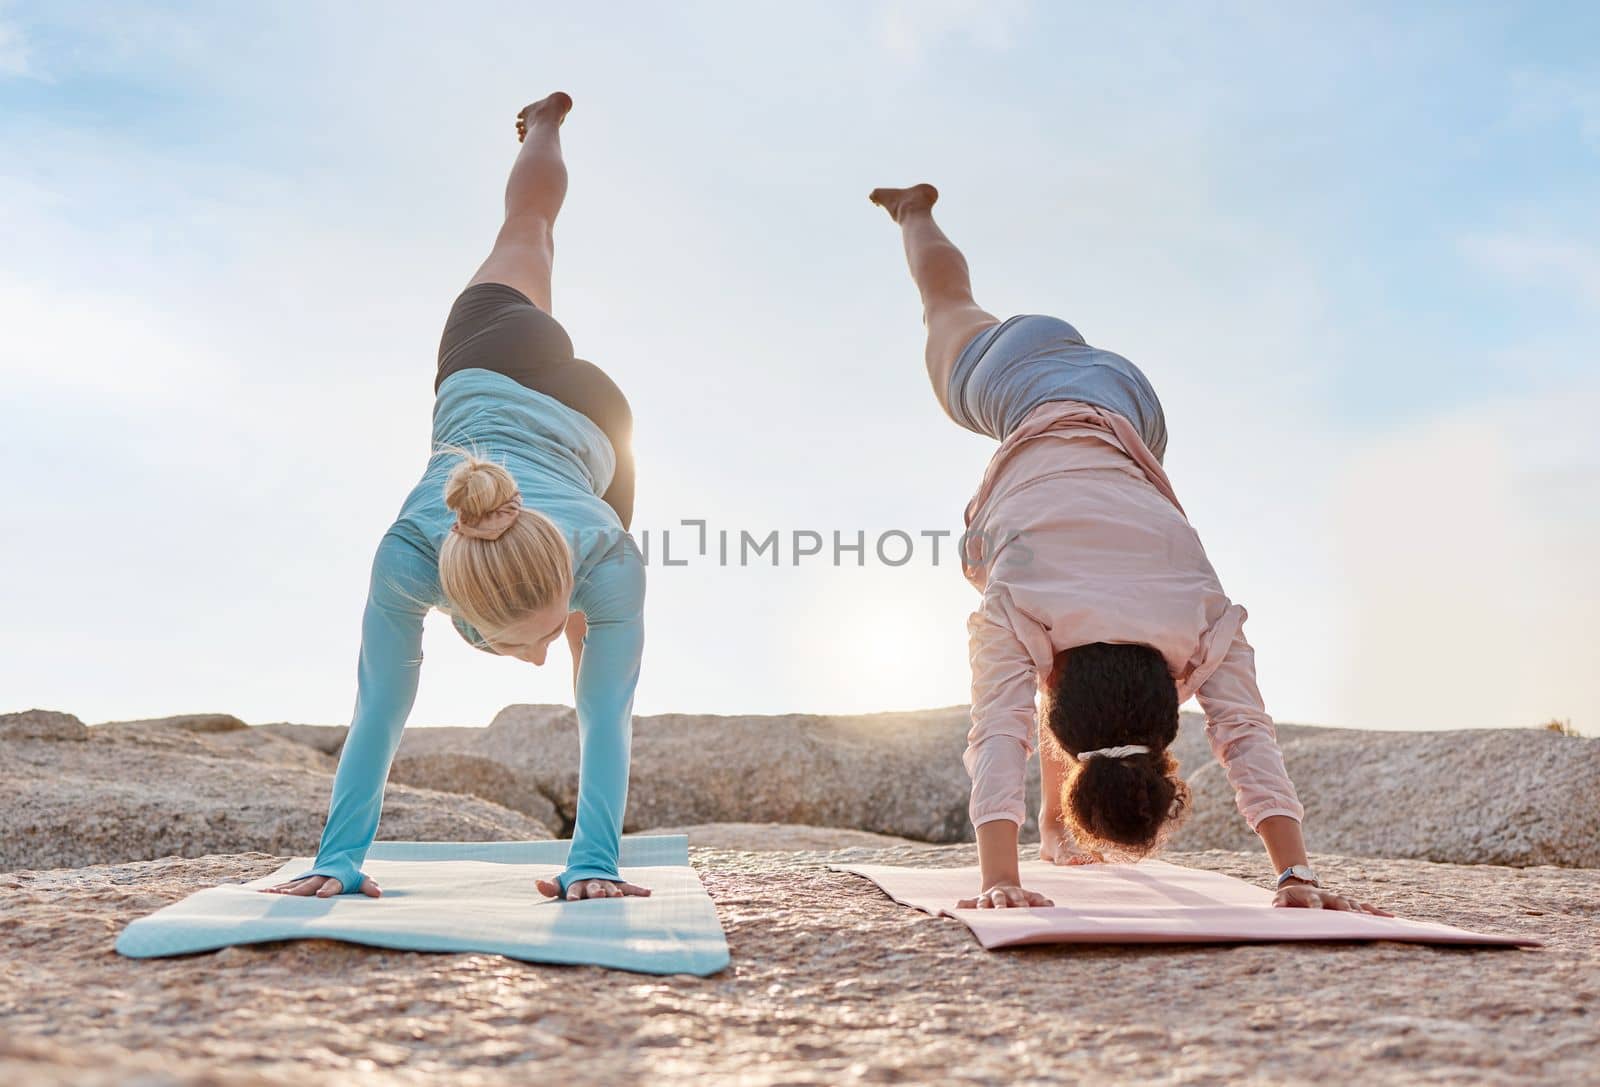 Yoga, stretching and fitness with friends on the beach together for mental health or wellness in summer. Exercise, diversity or nature with a woman yogi and friend outside for inner peace or balance by YuriArcurs